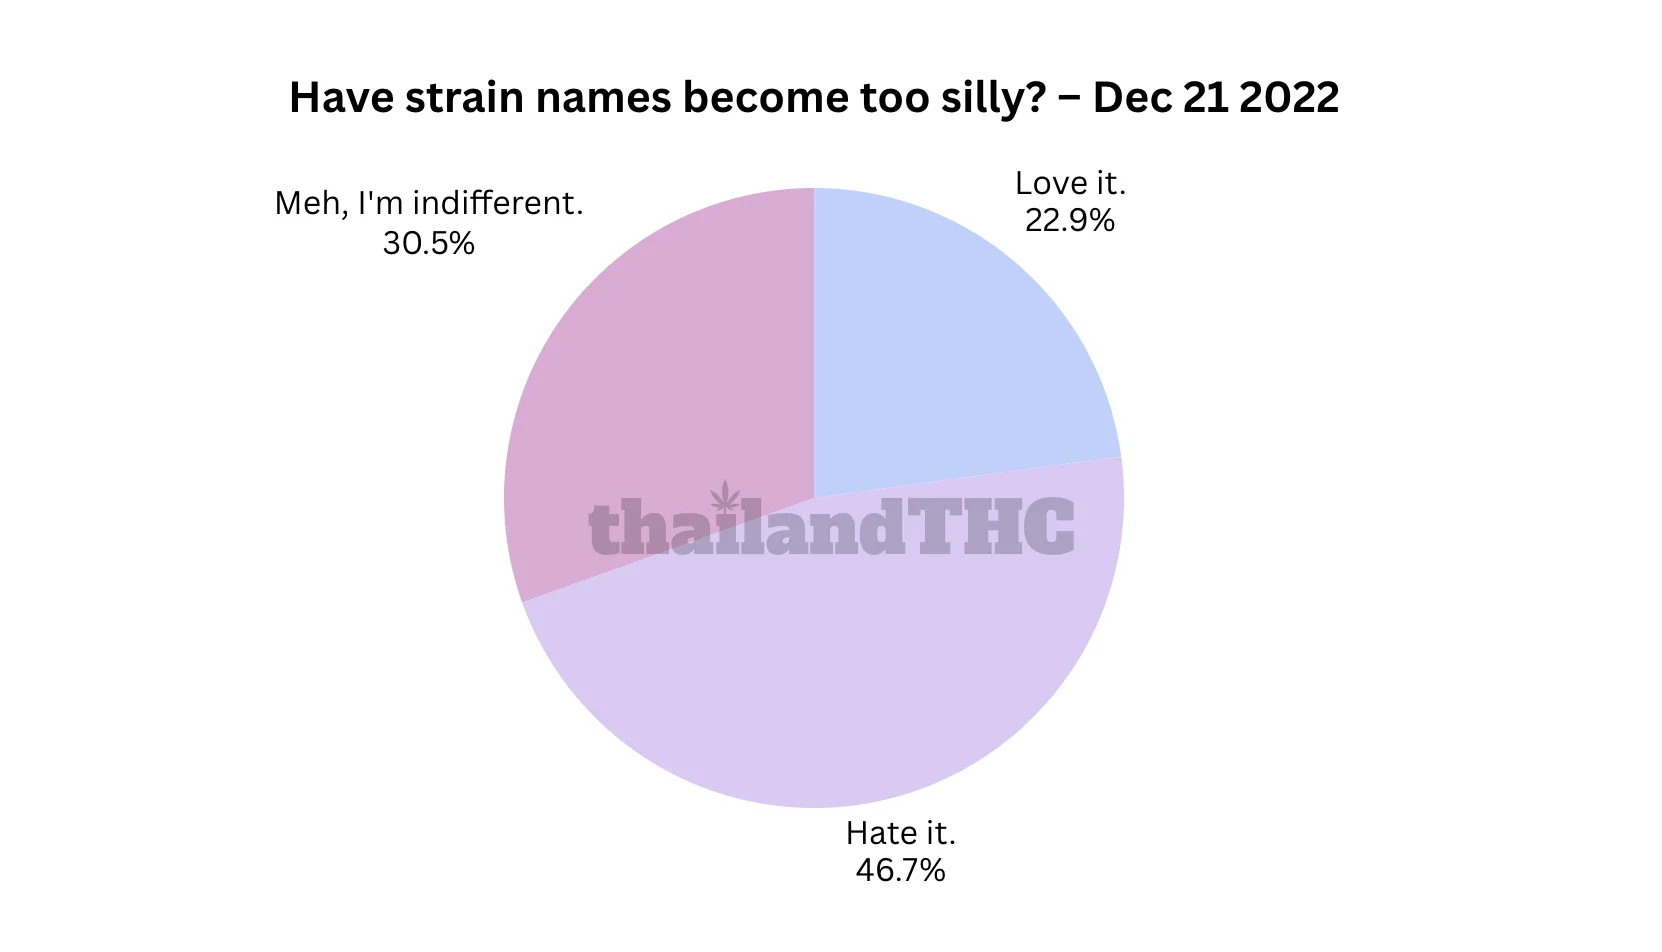 Have strain names become too silly?